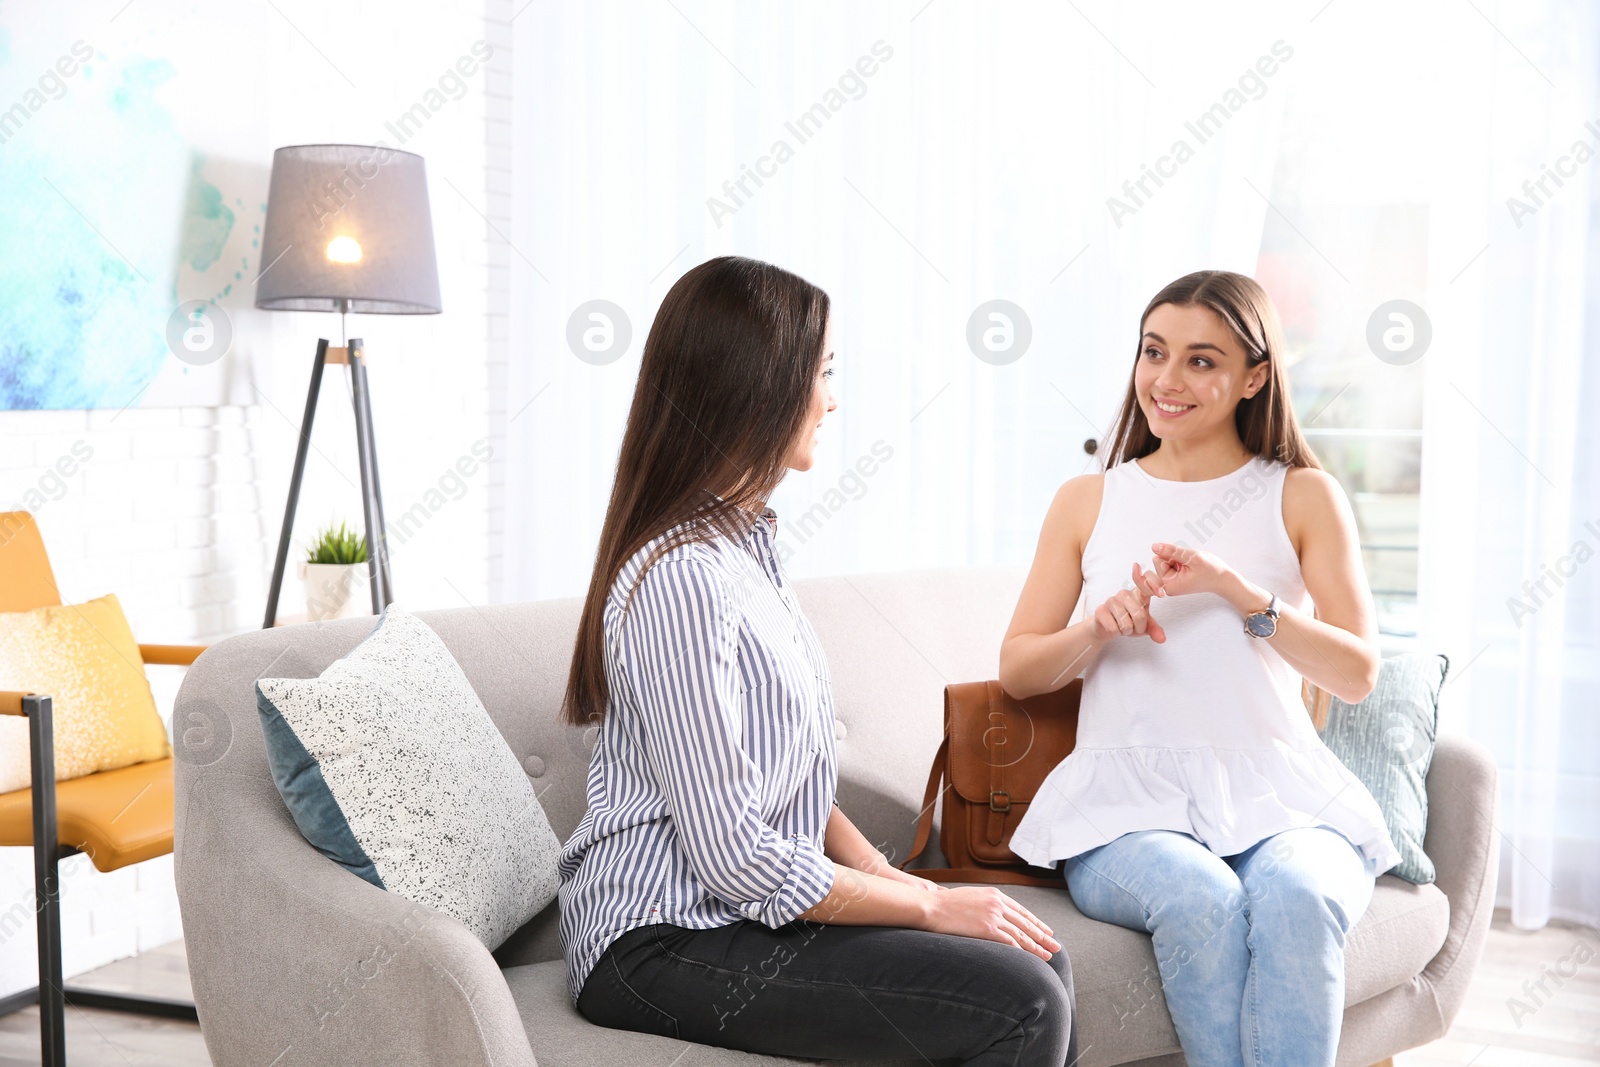 Photo of Hearing impaired friends using sign language for communication on sofa in living room